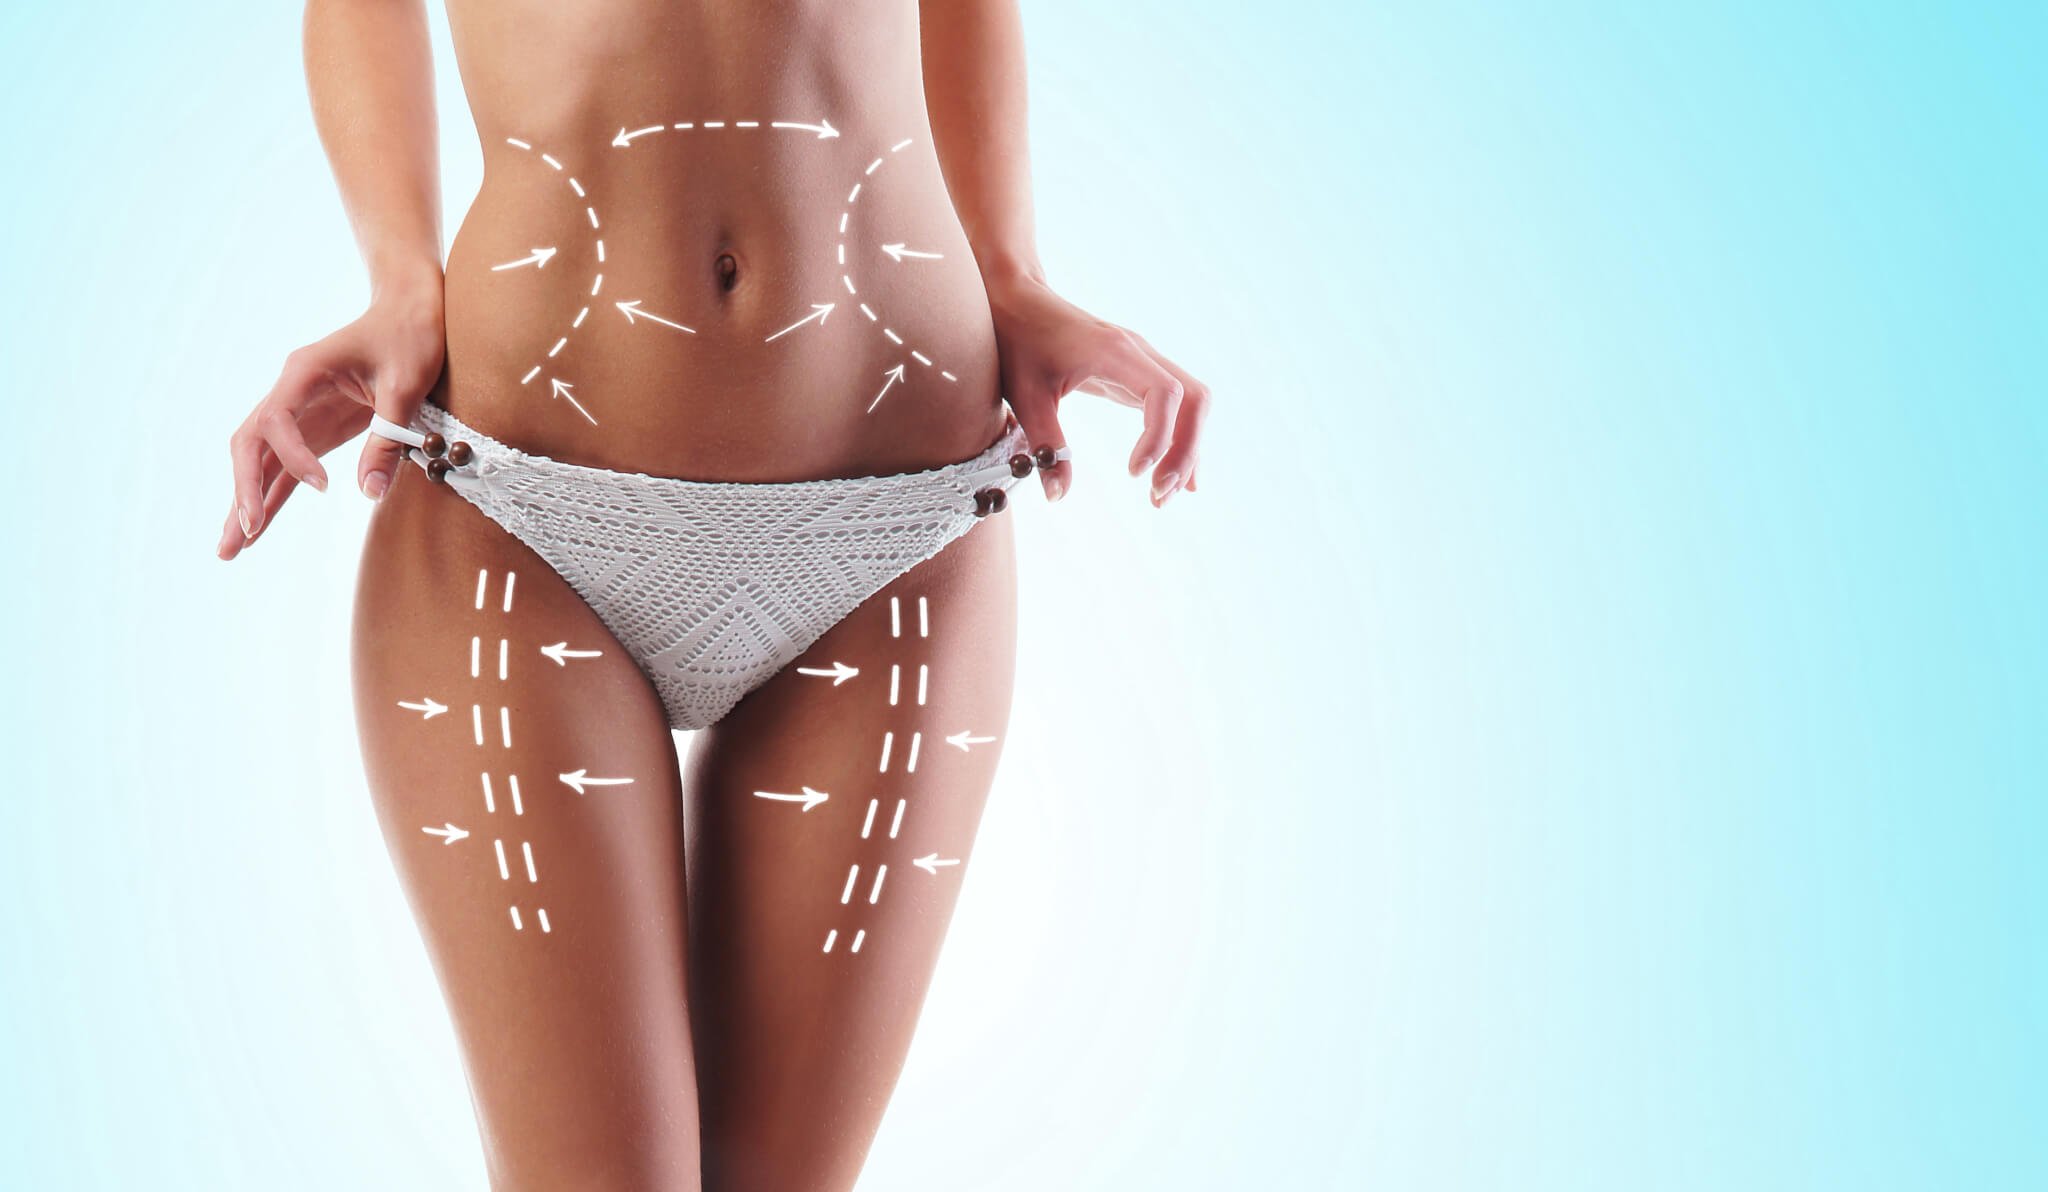 Liposuction or Abdominoplasty, What's Better